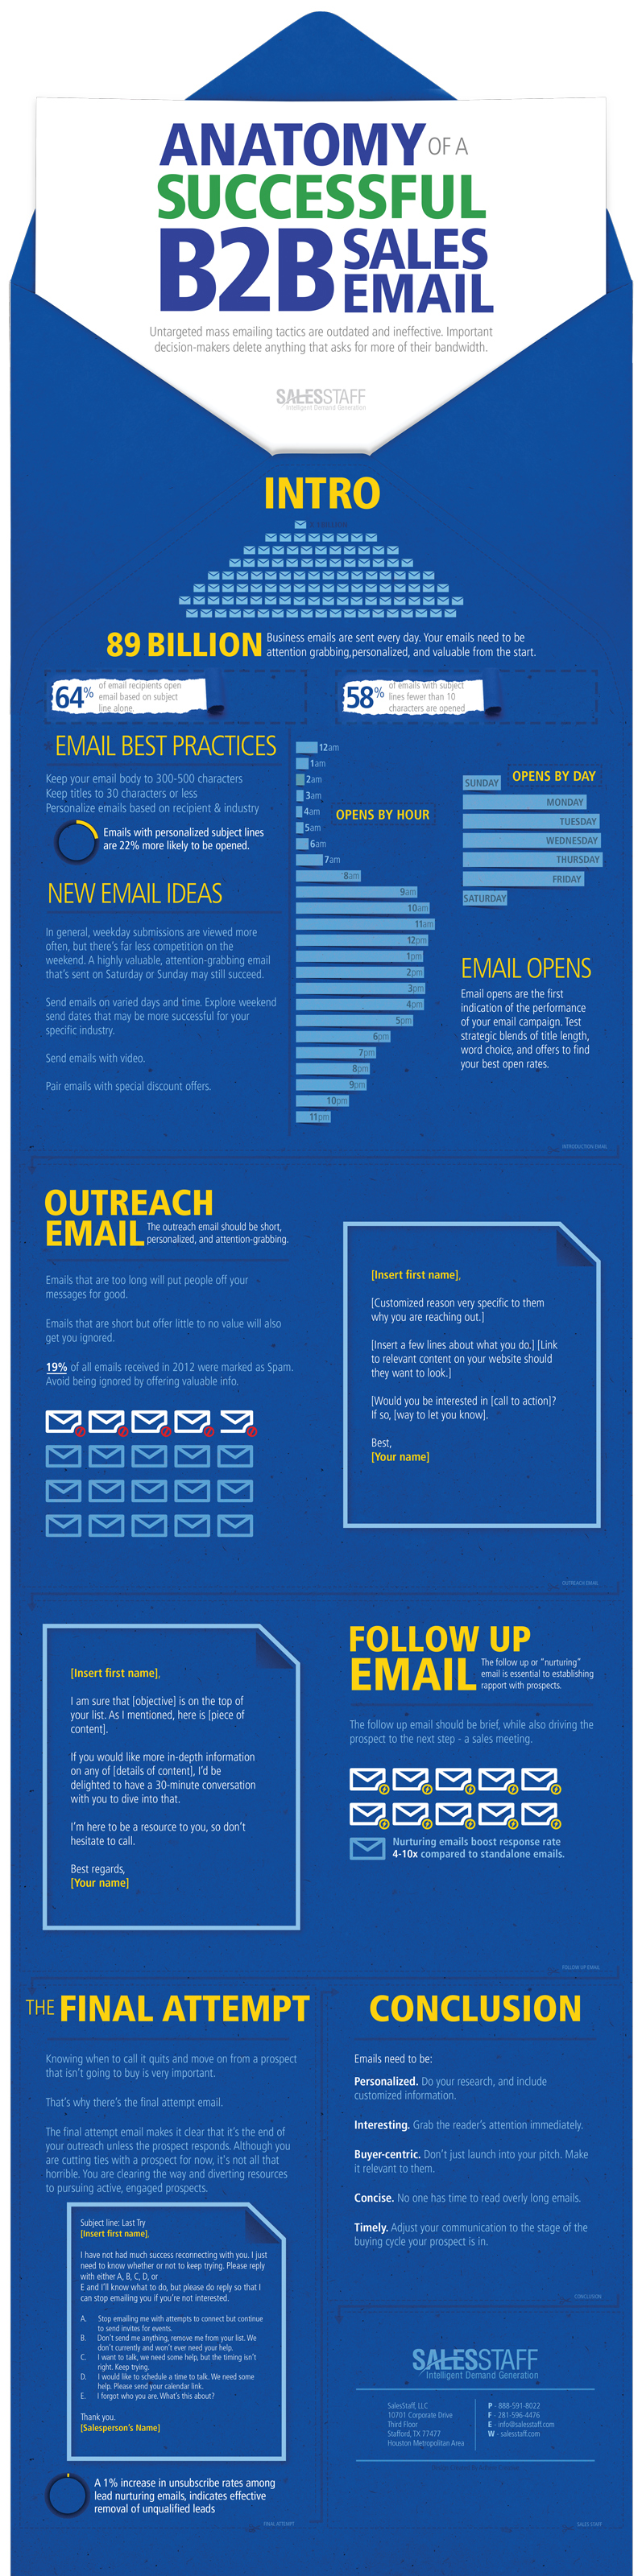 Anatomy of a Successful B2B Sales Email - Infographic